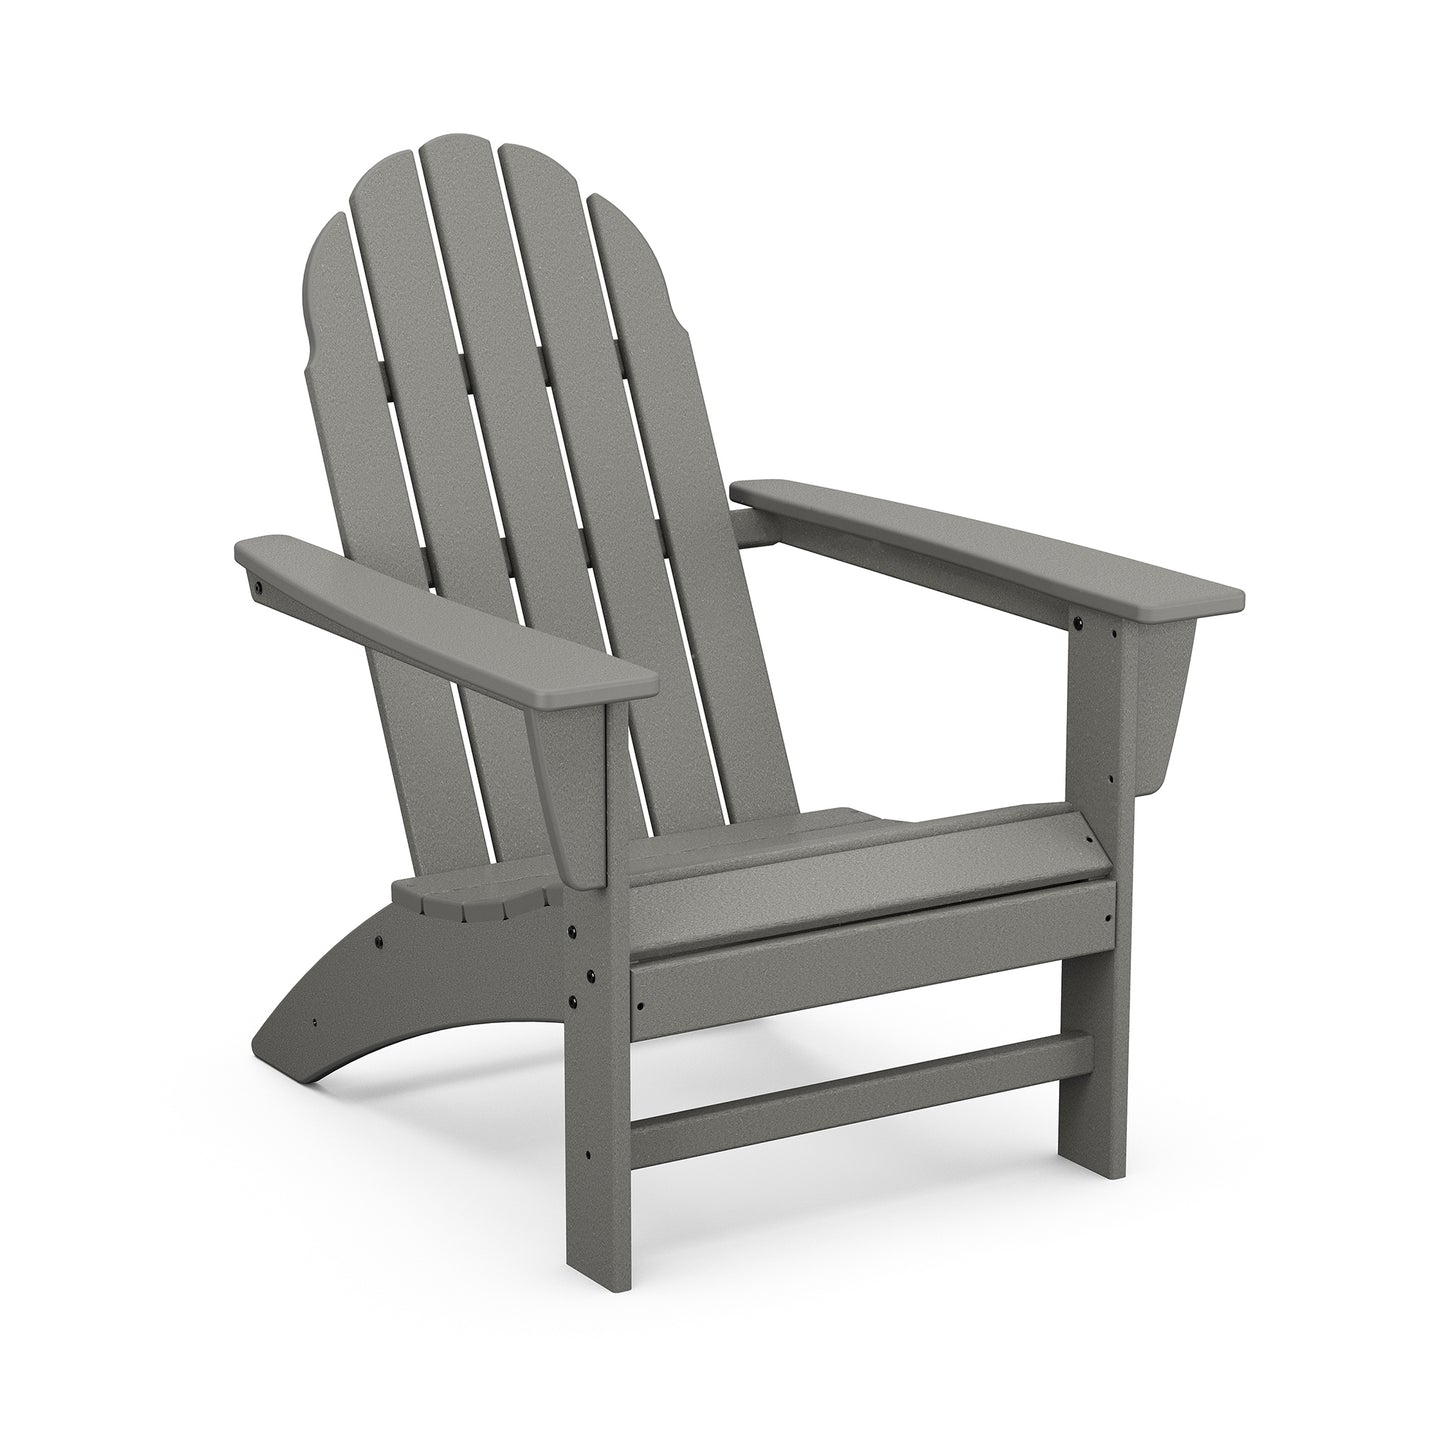 A gray POLYWOOD Vineyard Adirondack chair made of slatted plastic, featuring a high back and wide armrests, positioned against a white background.